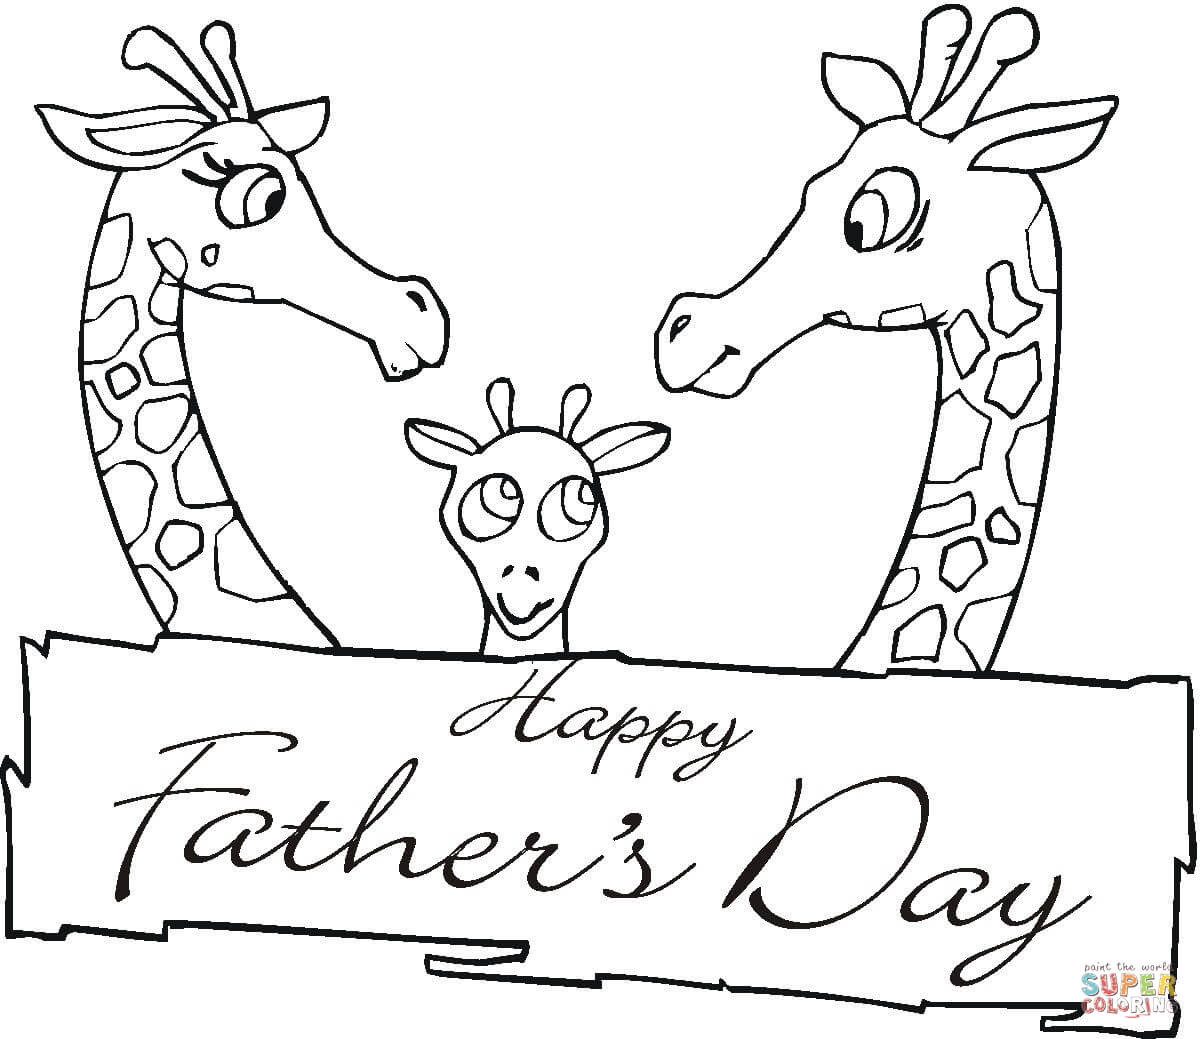 Free Printable Fathers Day Coloring Pages
 Giraffes To her Father s Day coloring page